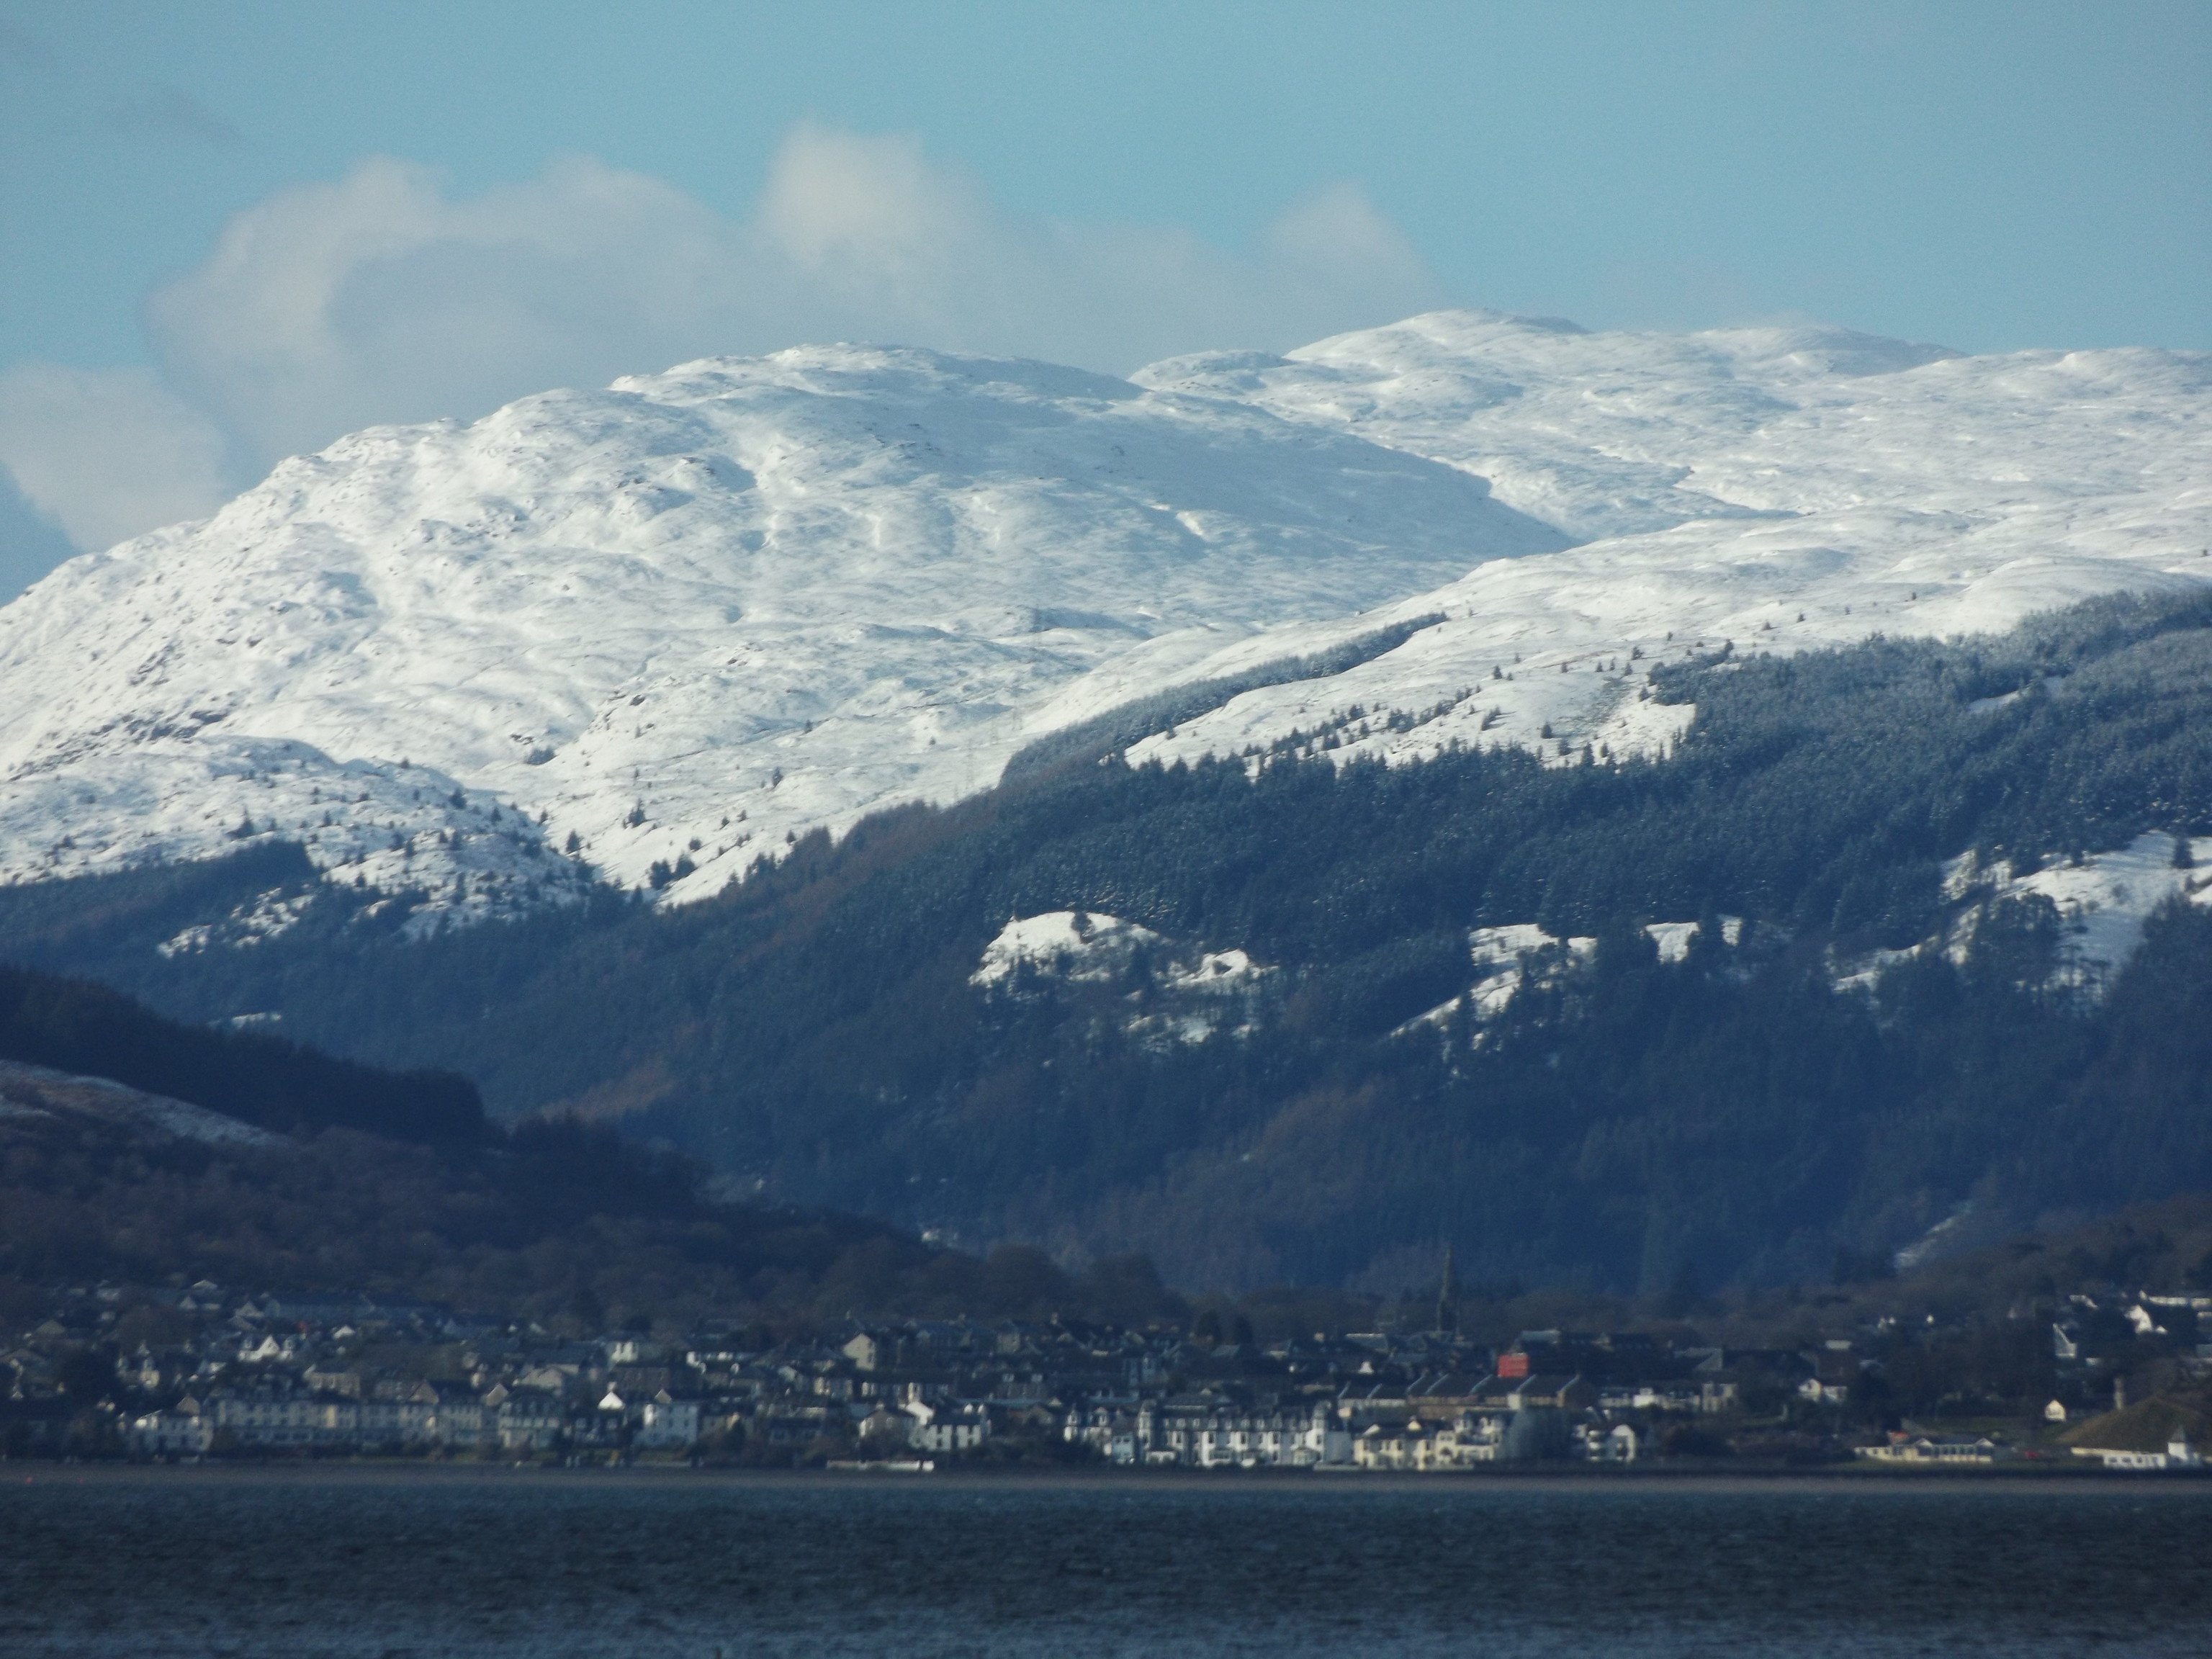 Snow-covered Mountains over Dunoon, Argyll, 4 April 2018